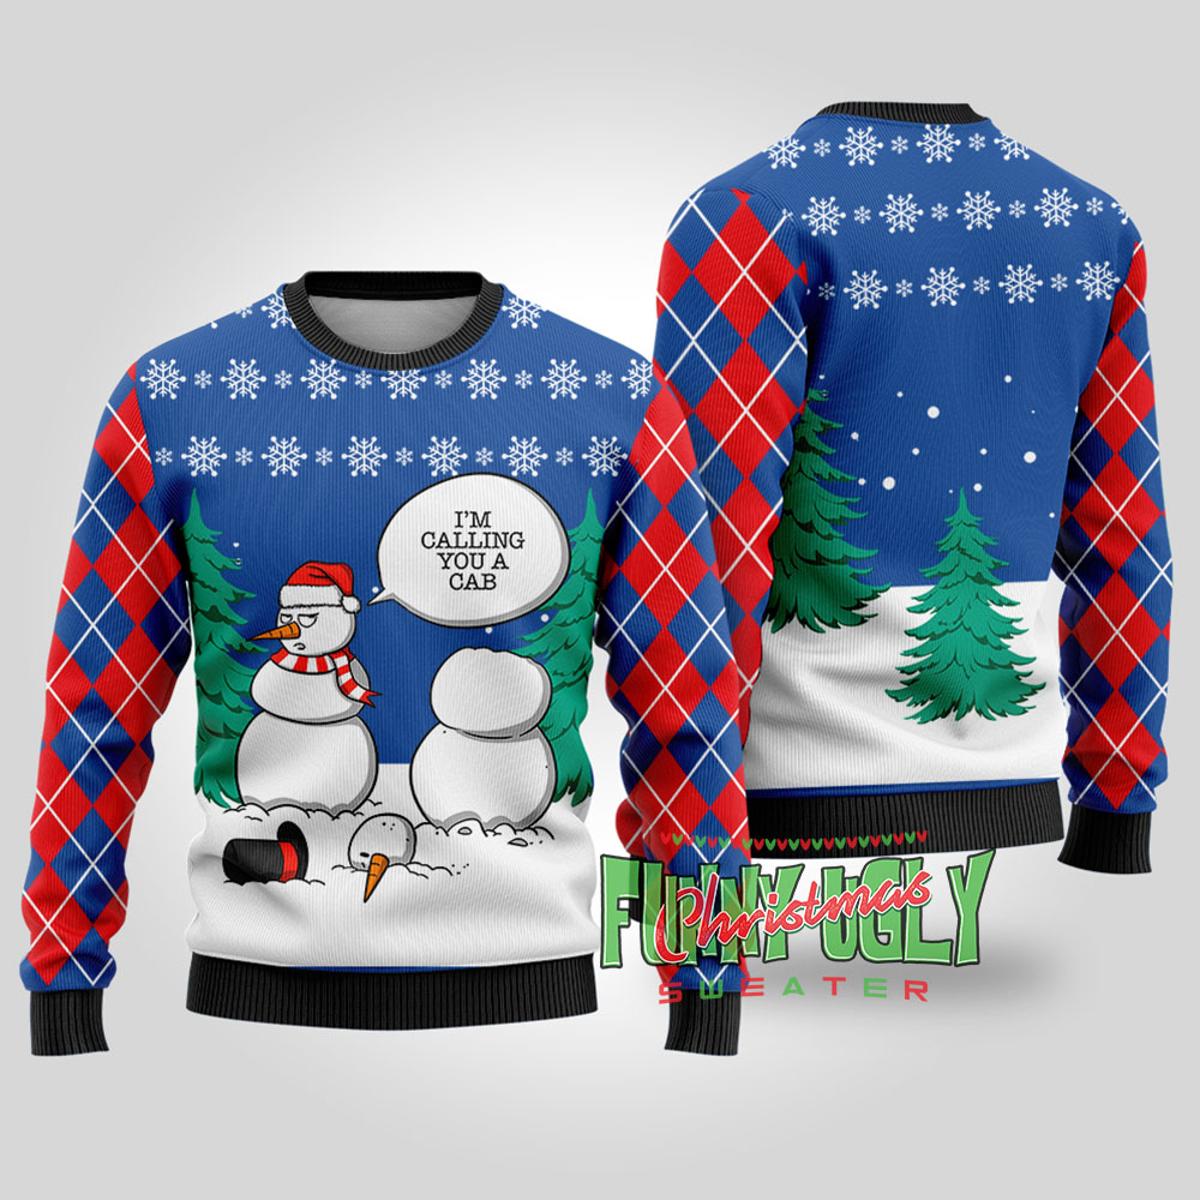 Funny Snowman Christmas Sweater